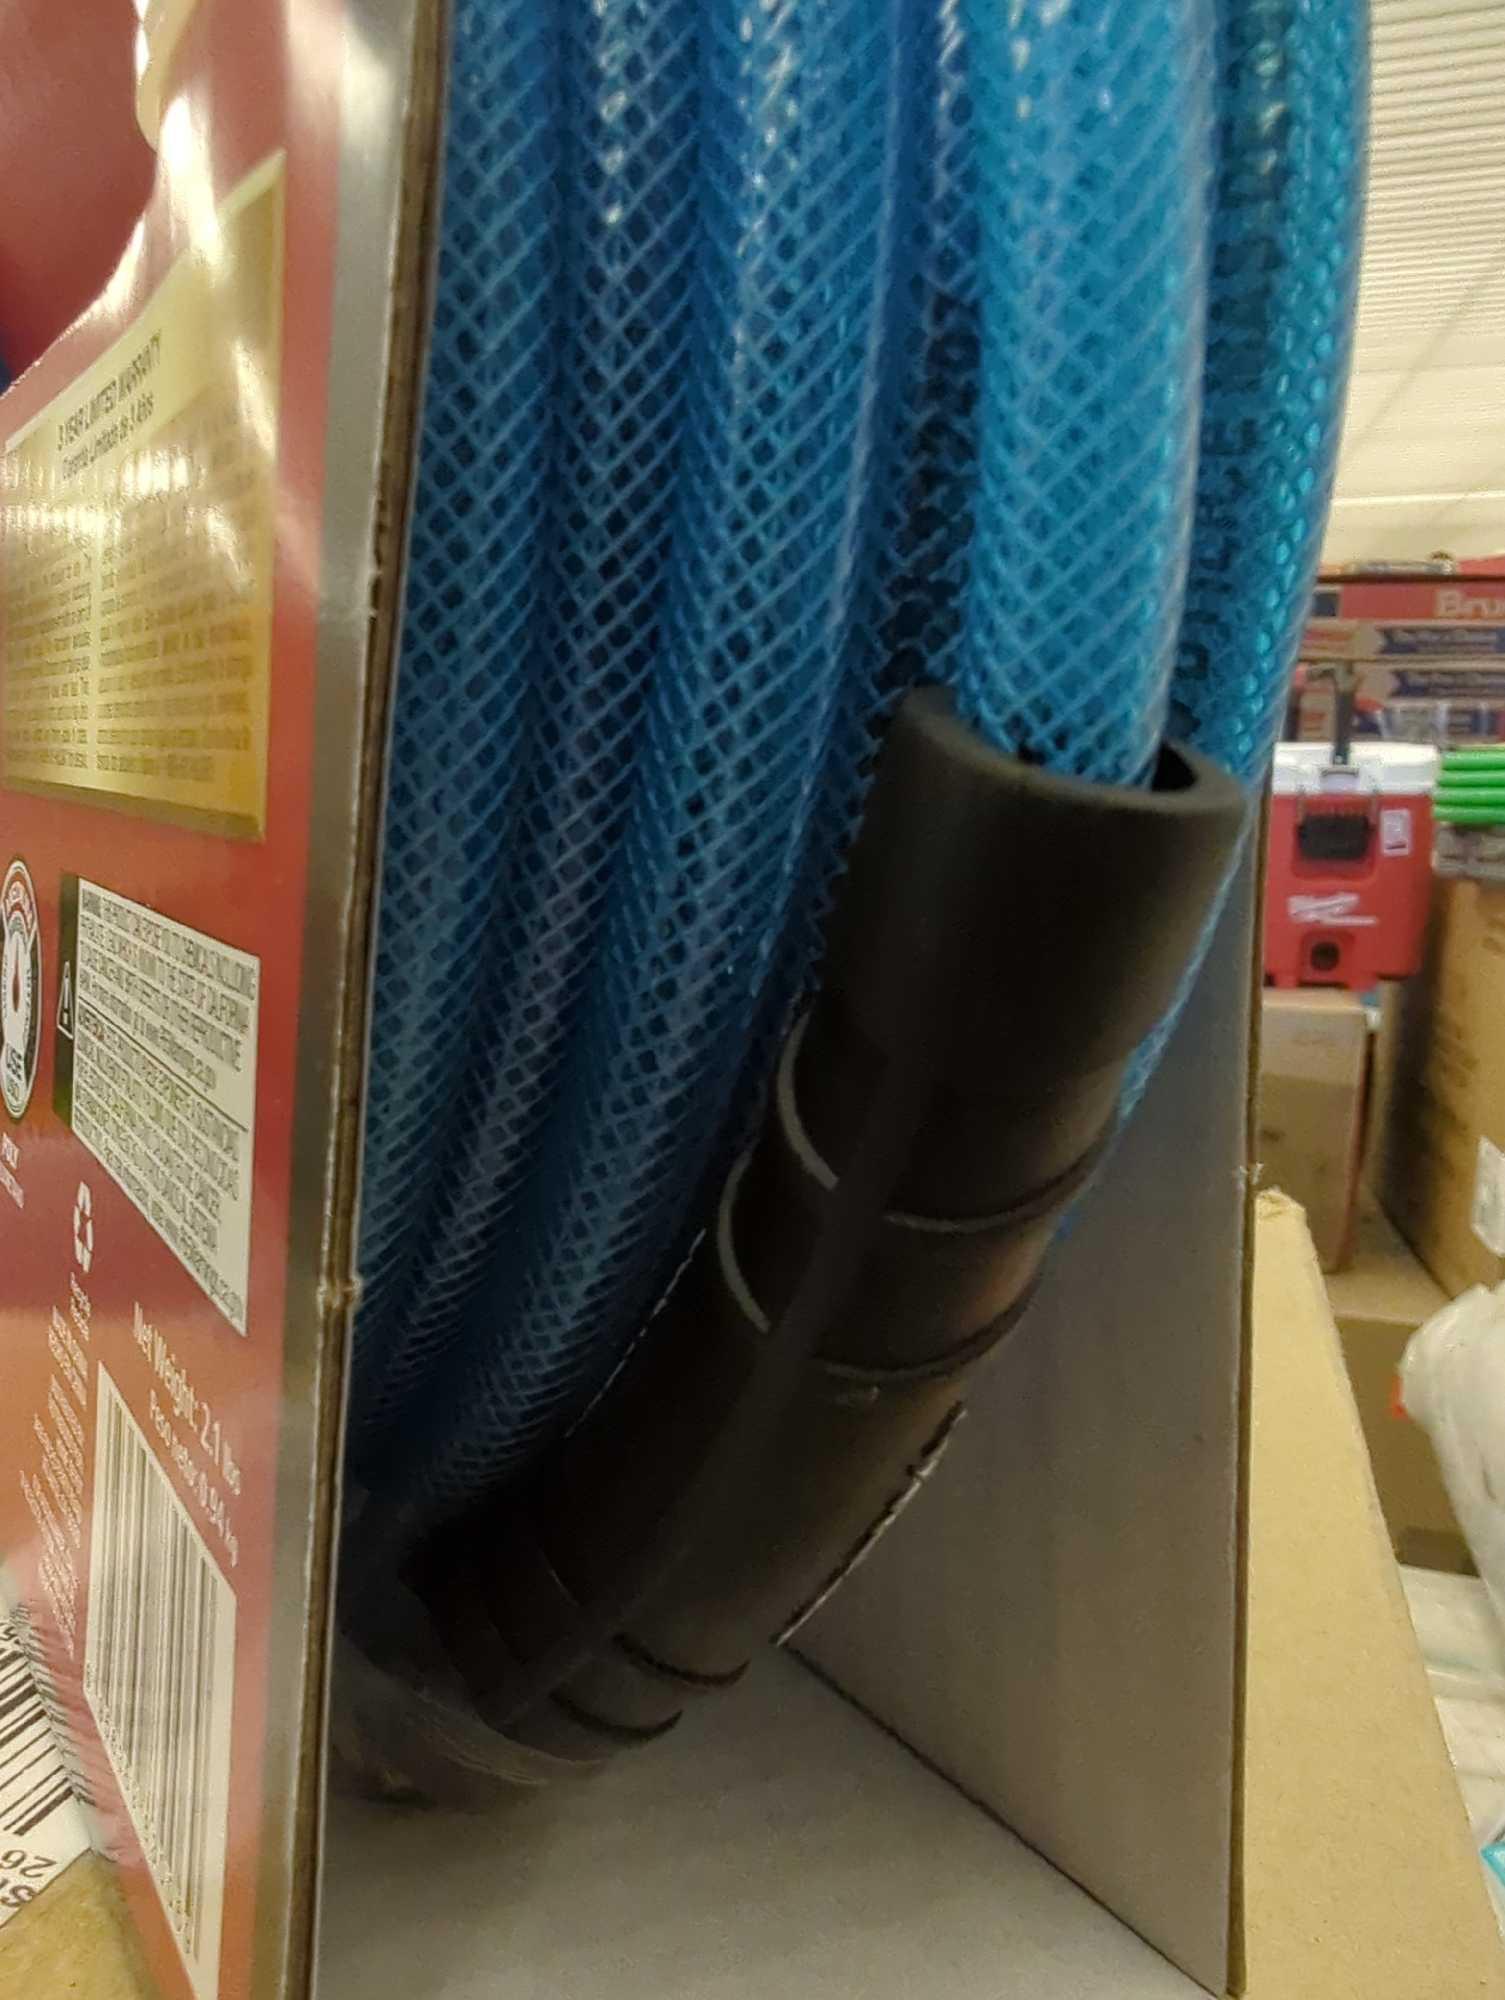 Husky 1/4 in. x 50 ft. Polyurethane Air Hose, Appears to be New in Factory Banded Package Retail